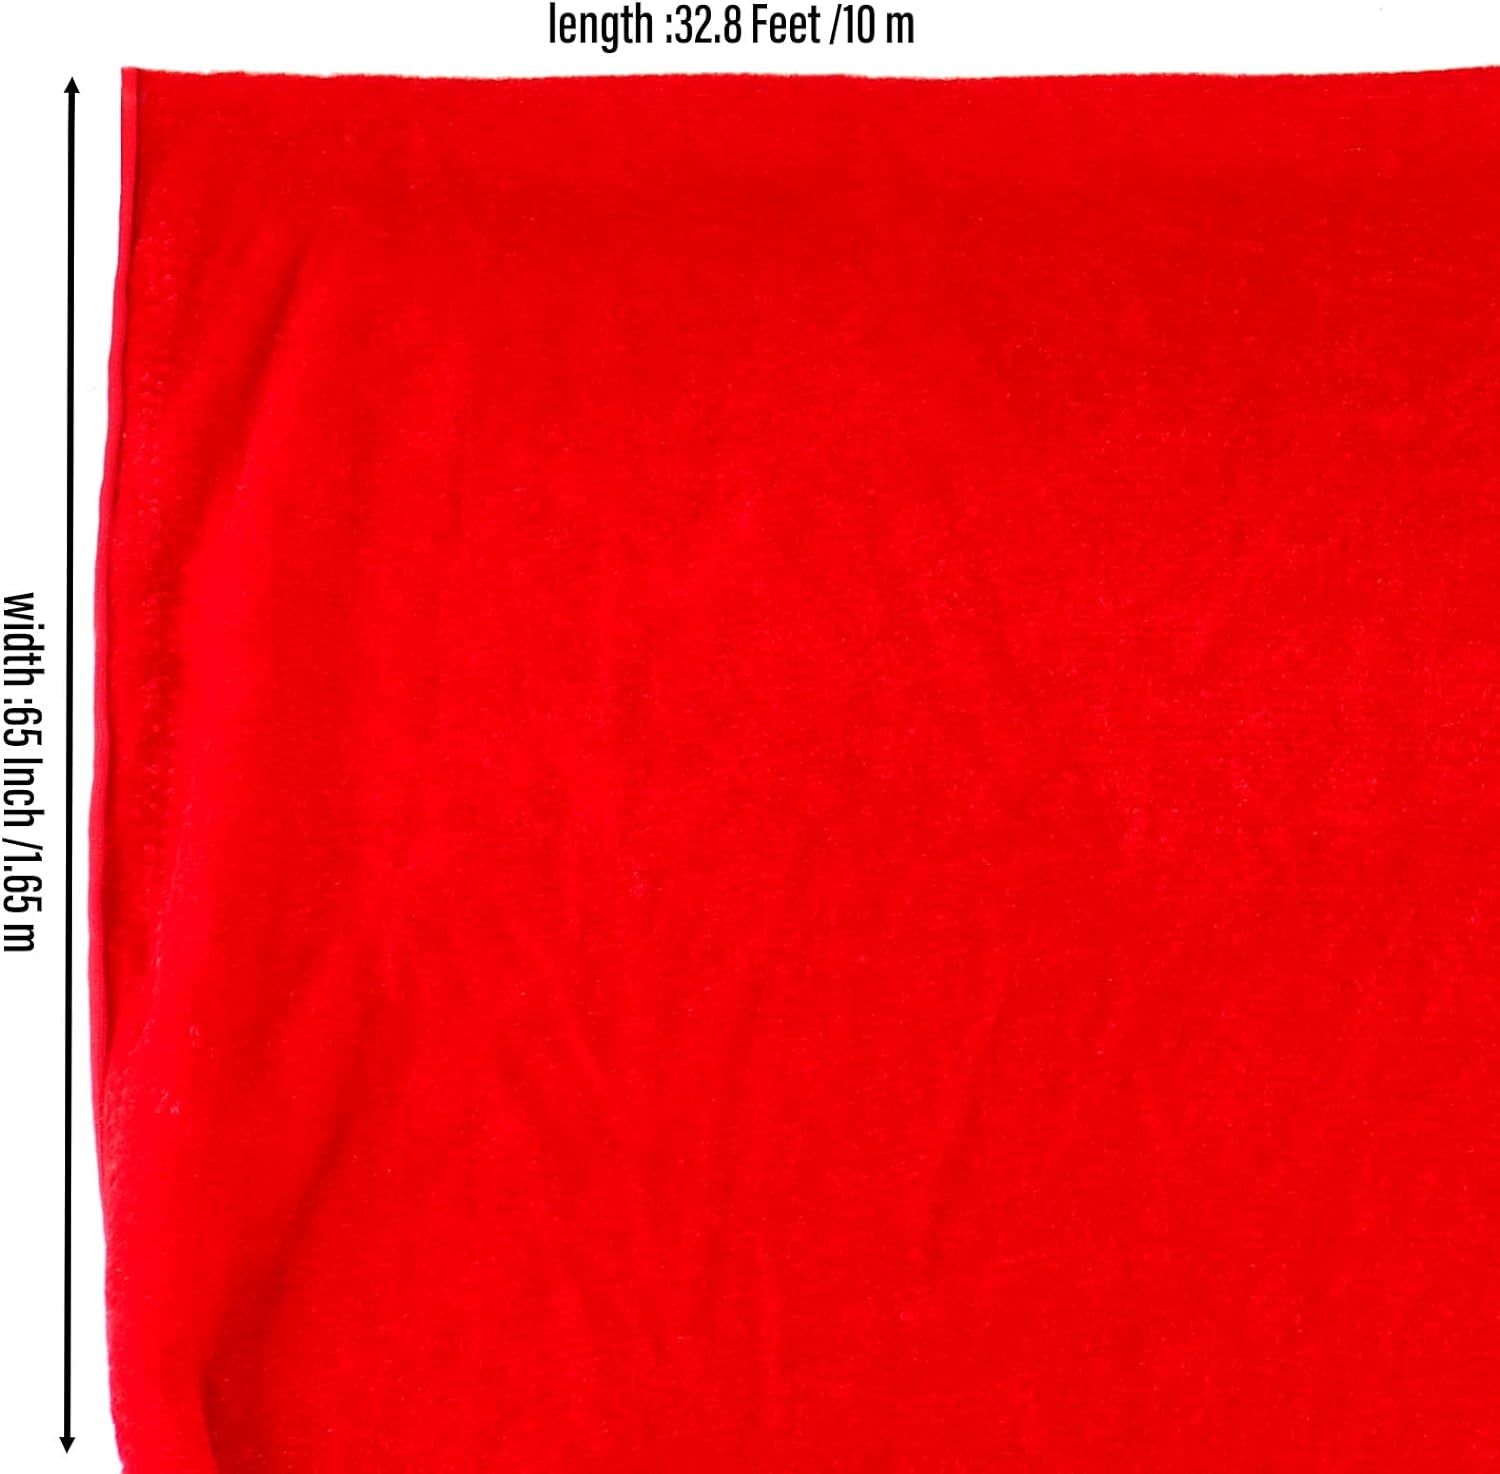 10 Yard X 65 Inch Stretch Velvet Fabric Red Soft Silky Stretch Velvet by the Yard for Home Decoration, Tables, Curtains & Sofa